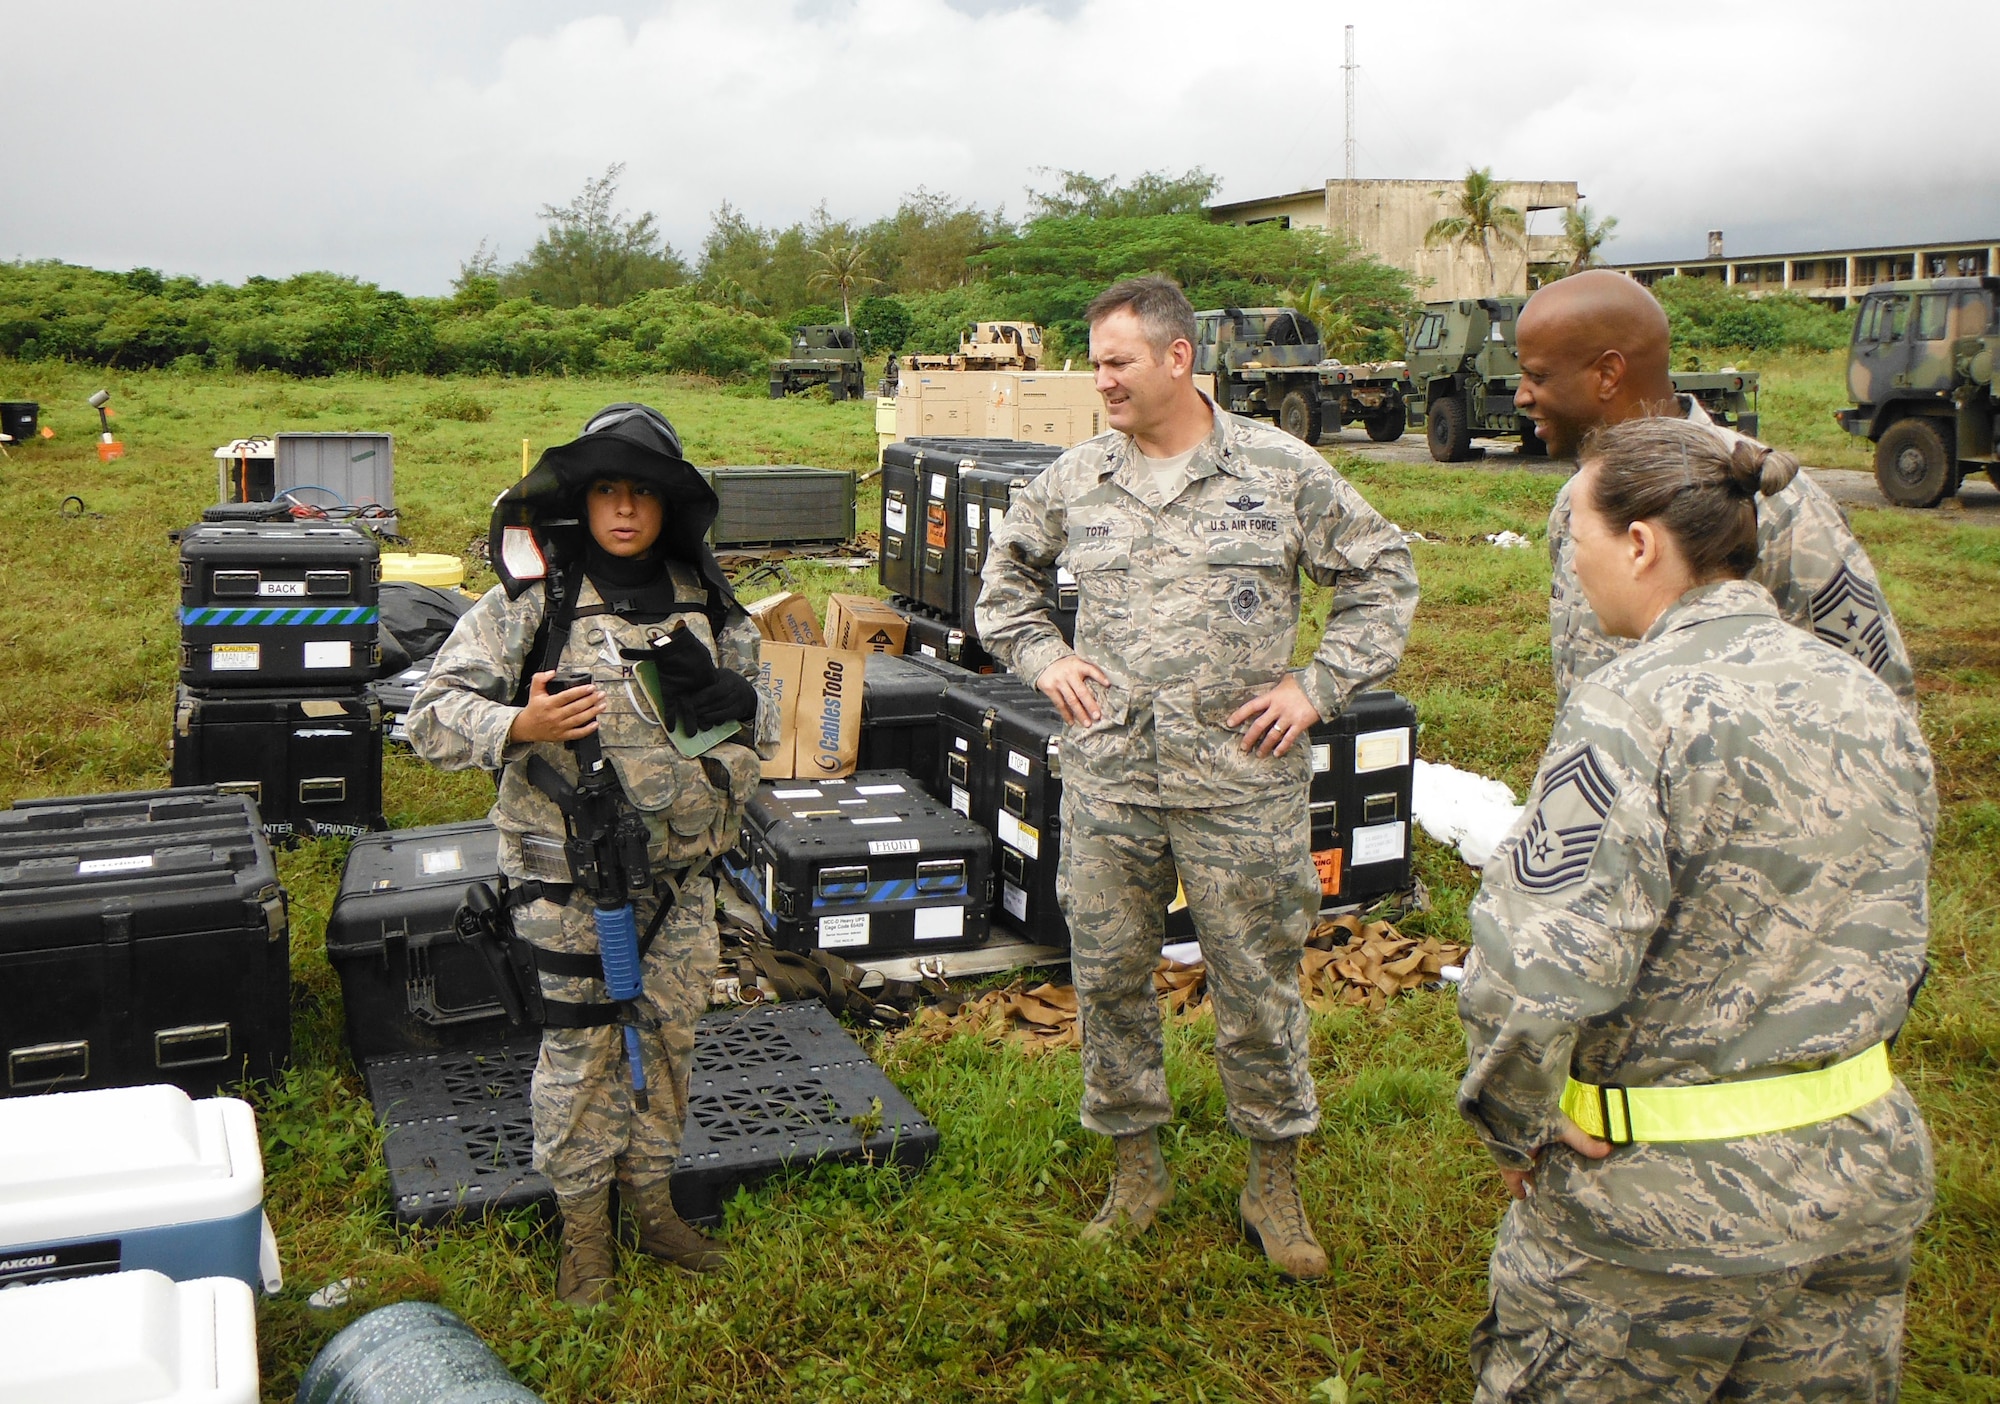 2nd Lt. Denisse Paz briefs Brig. Gen. Andrew Toth and Chief Master Sgt. Michael McMillan on the site and status of the personnel during an exercise Oct. 28, 2014, at Andersen Air Force Base, Guam. The exercise allowed Airmen from the 644th Combat Communications Squadron to exercise their abilities to respond to various scenarios during contingency operations. Paz is the 644th CBCS mission commander. Toth is the 36th Wing commander and McMillan is the 36th Wing command chief. (Courtesy photo)